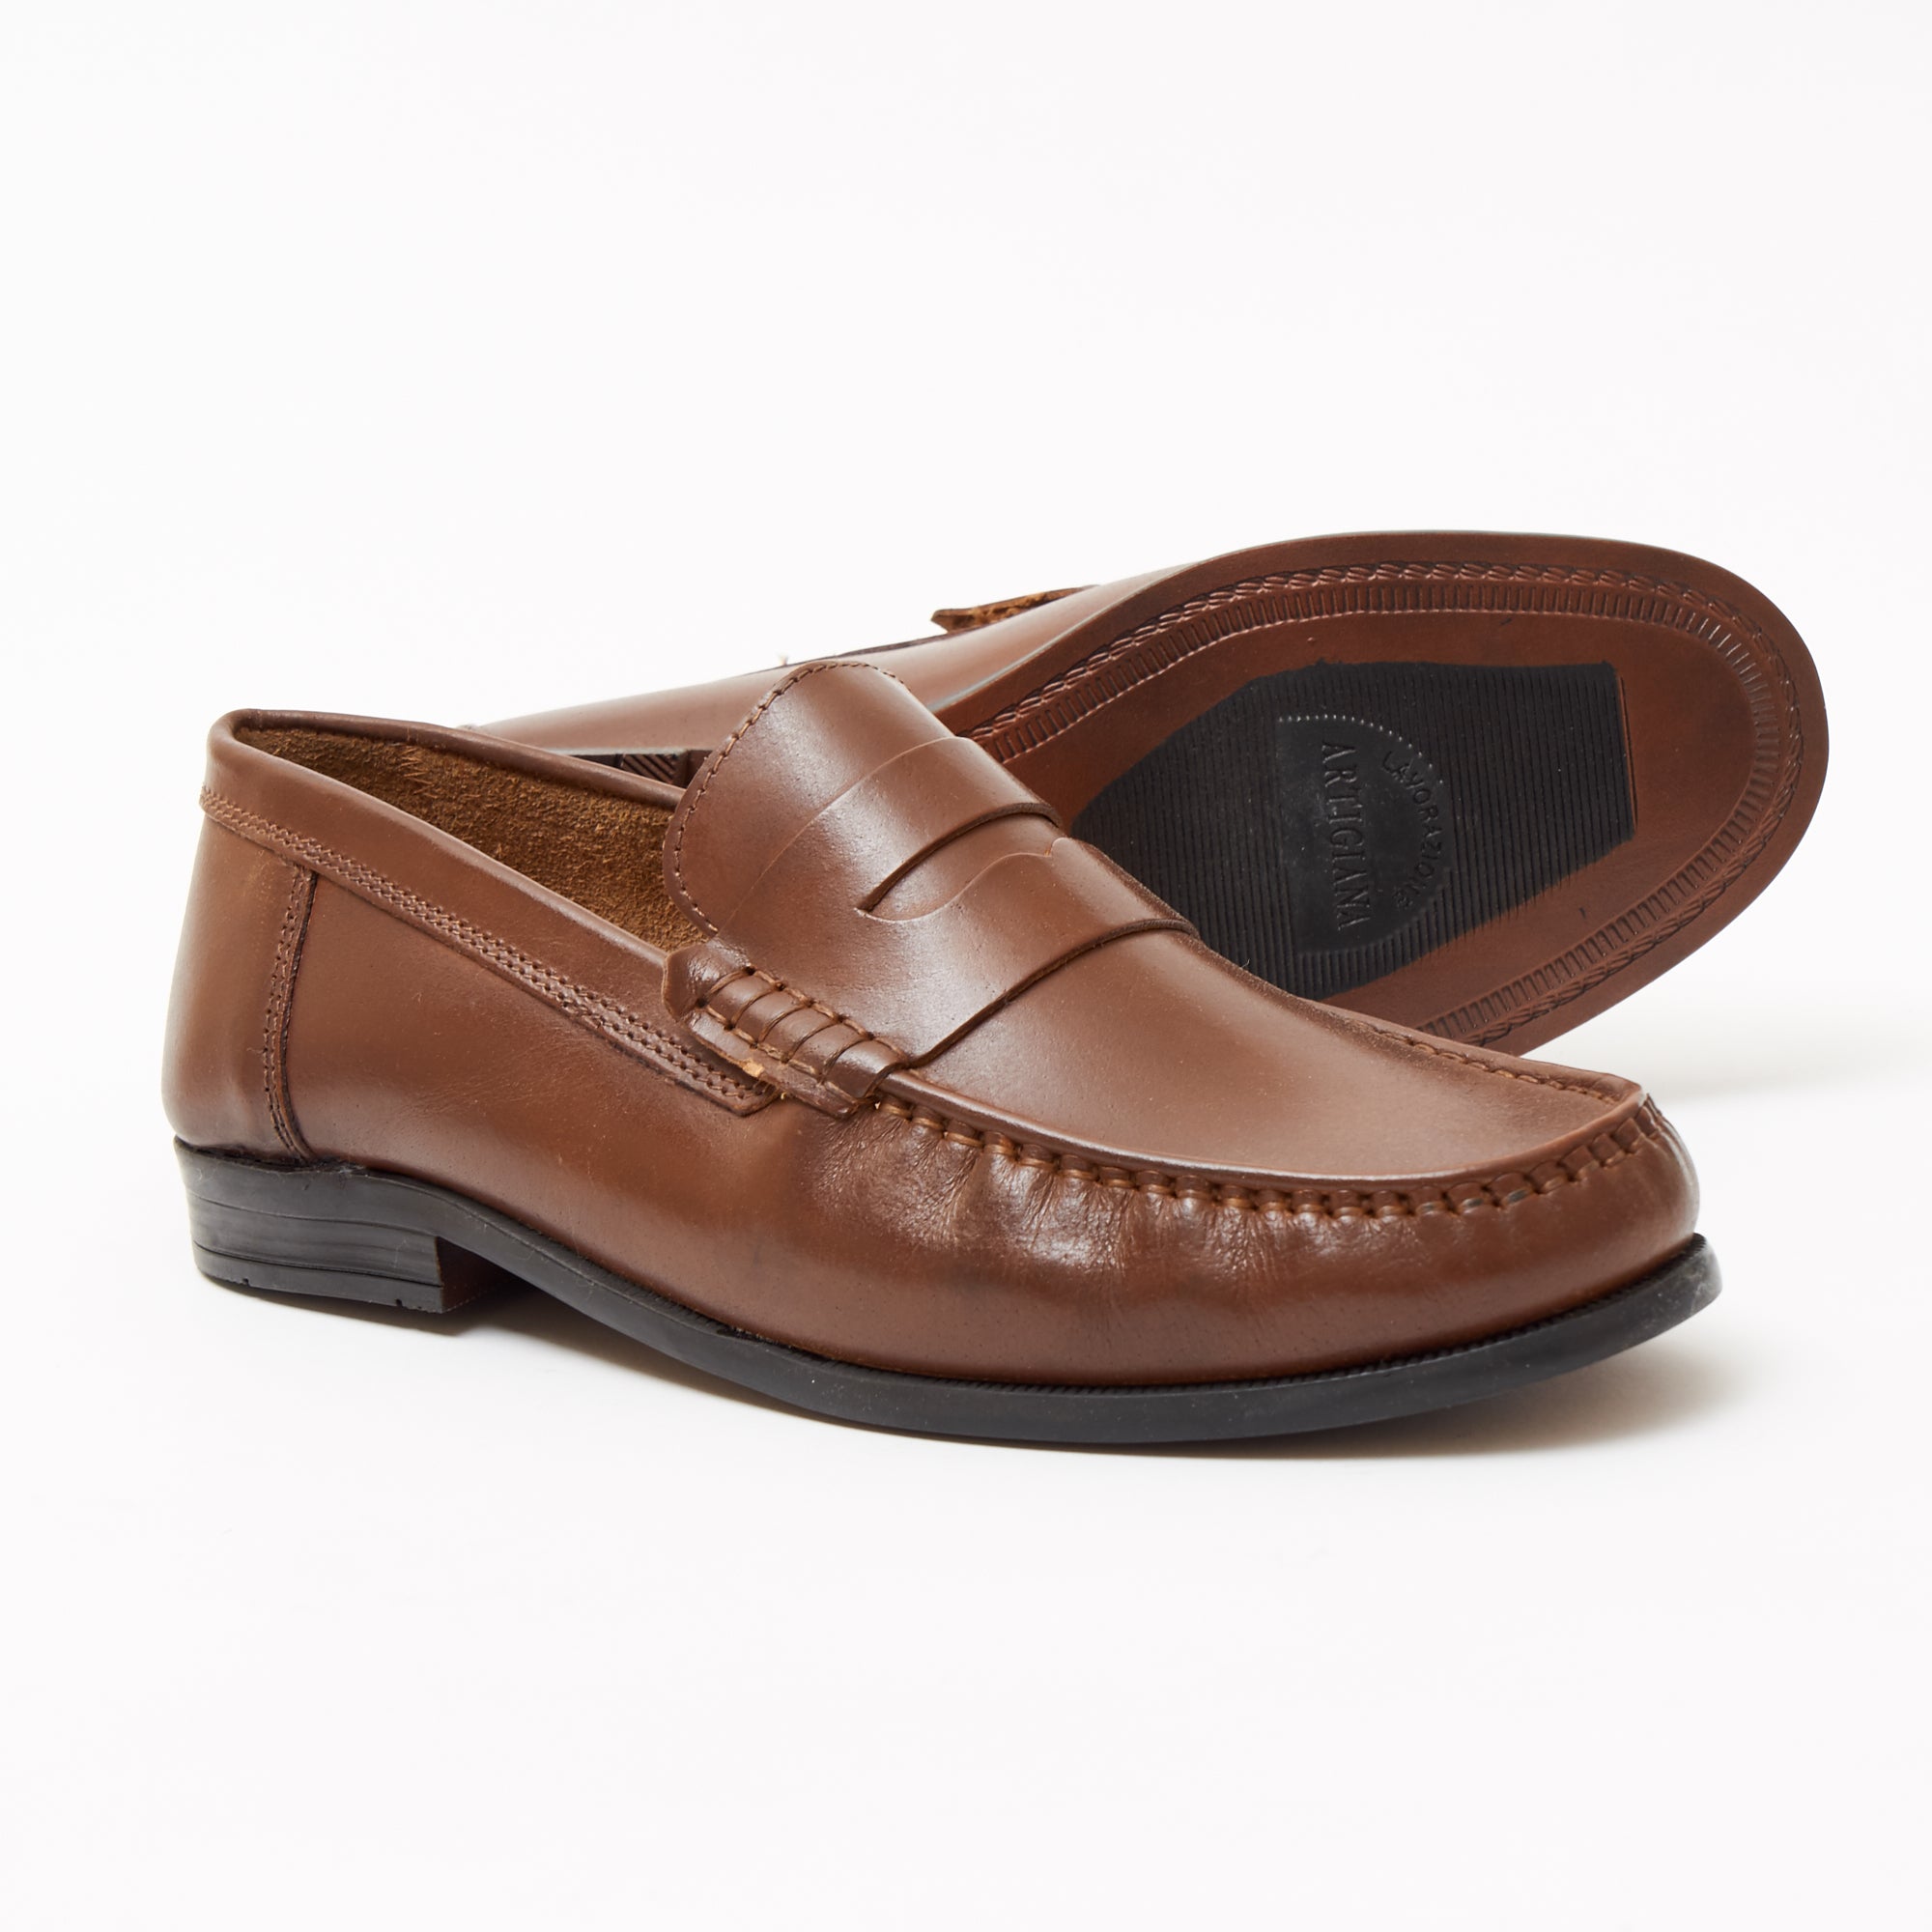 Mens Leather Casual Shoes - 2812_Tan Buff